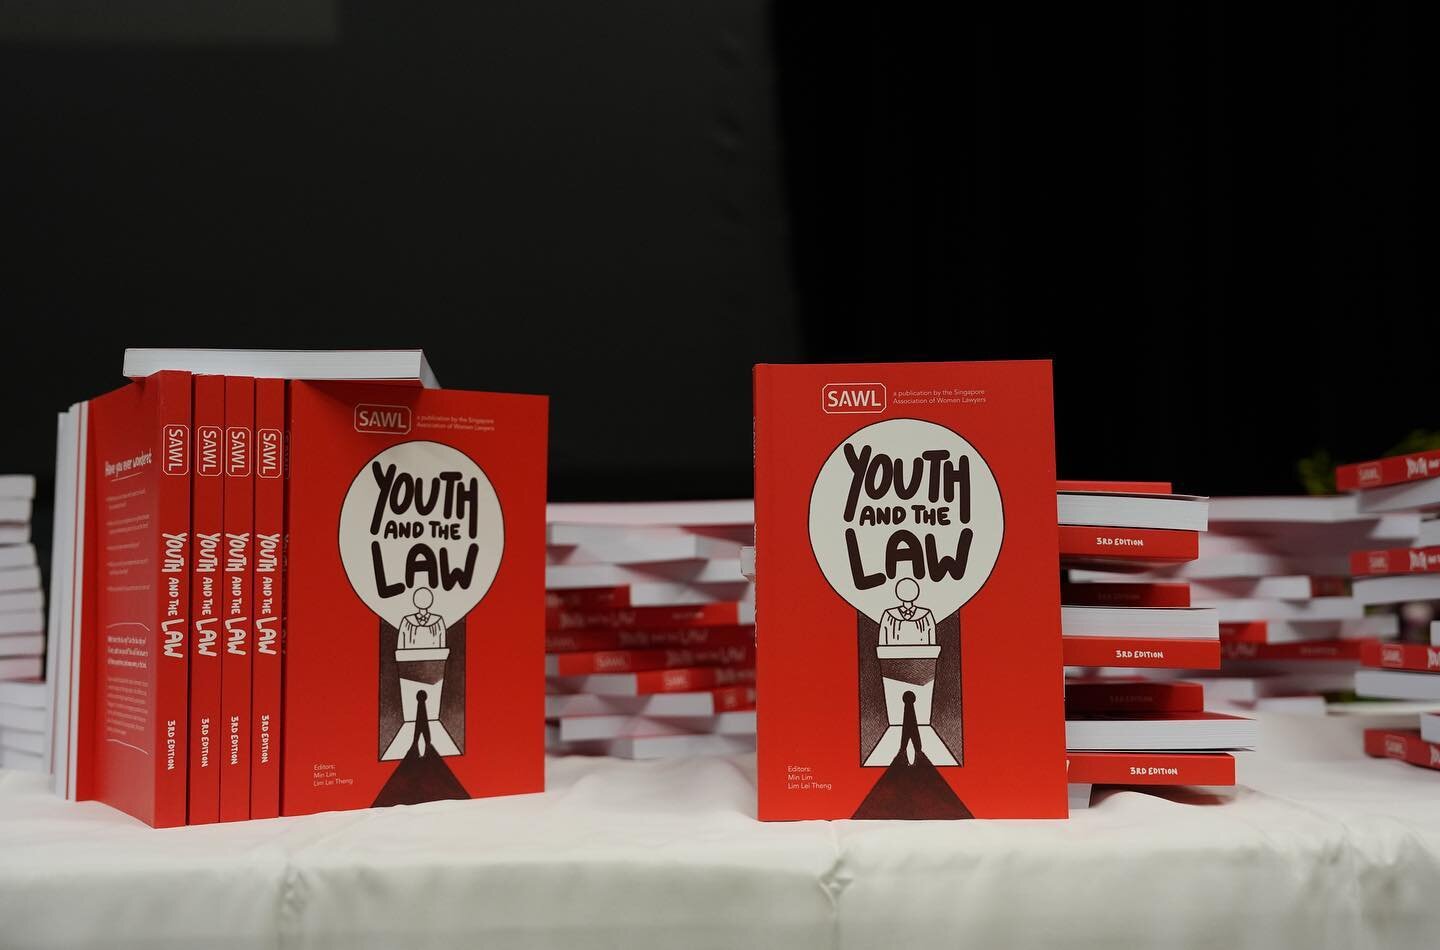 Launch of SAWL&rsquo;s book &ldquo;Youth and the Law&rsquo; this afternoon. #SAWL